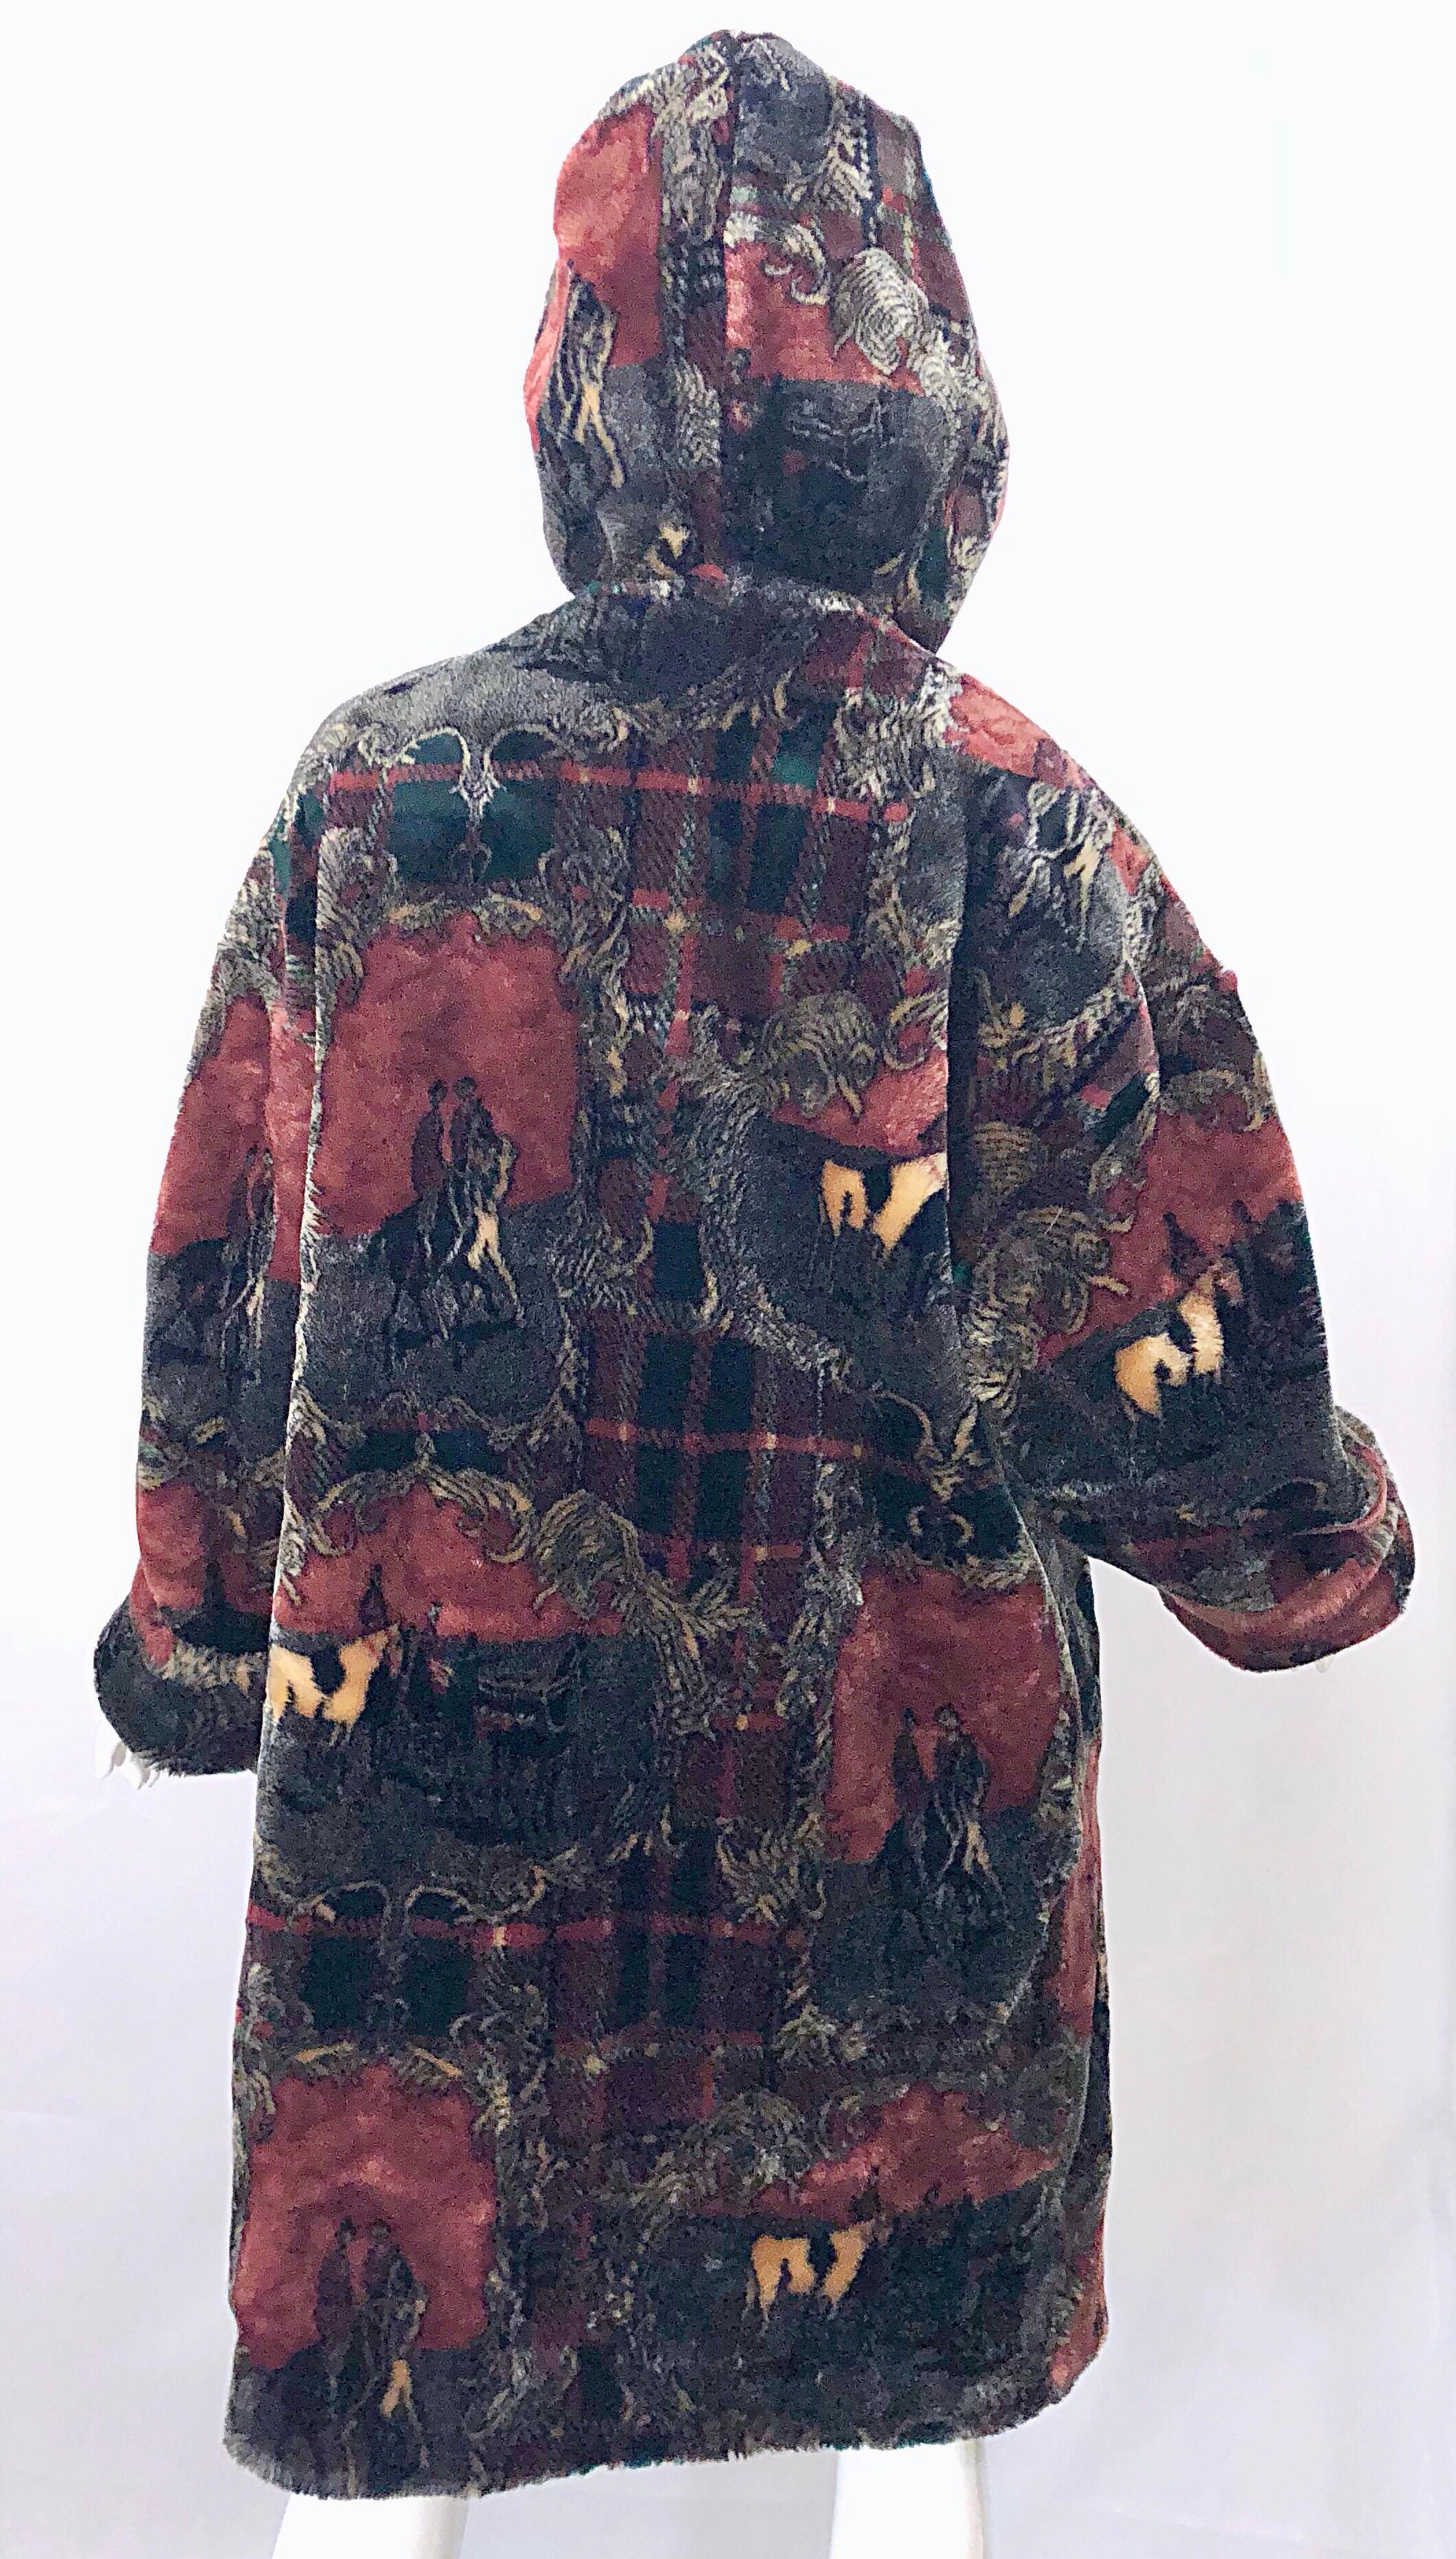 Extra Plush Vintage Faux Fur Equestrian Plaid Print Oversized Hooded Jacket For Sale 5